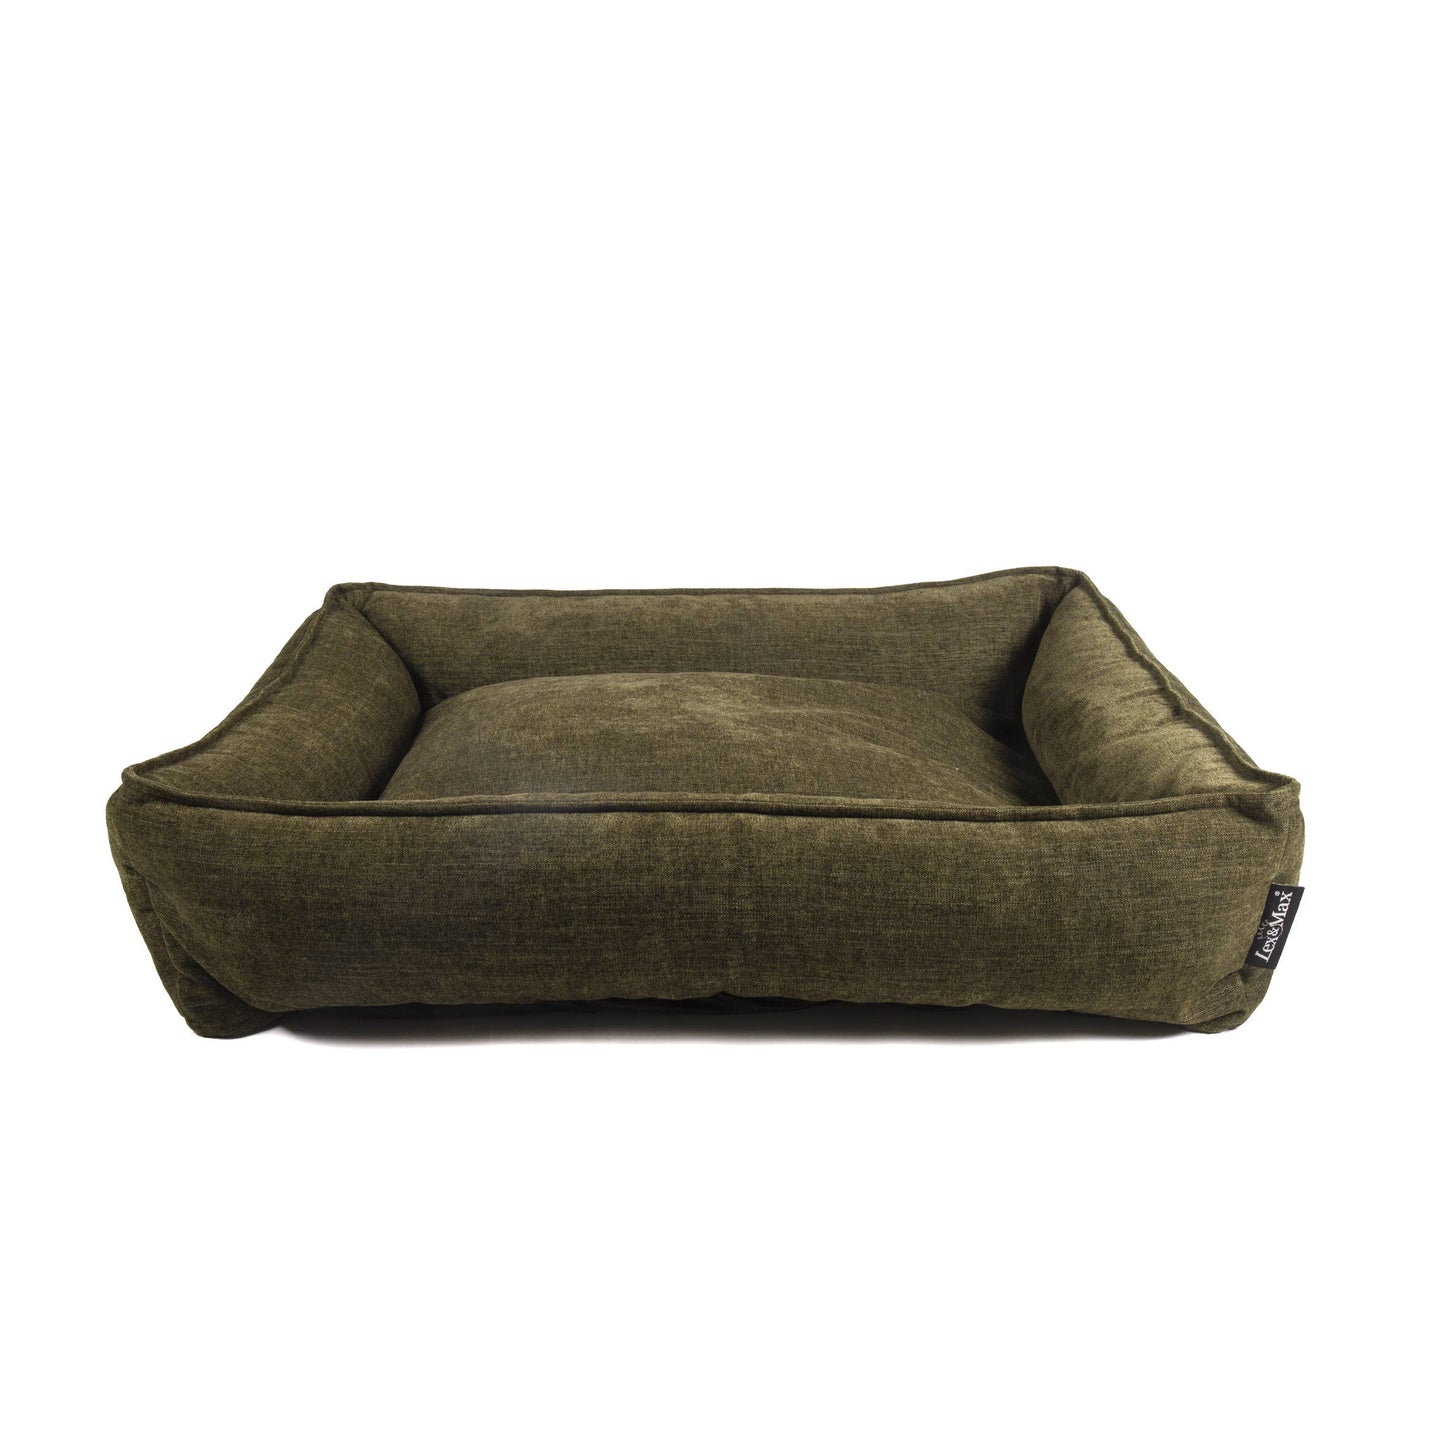 Stockholm Lounger Green Small 80 X 65 cm Image